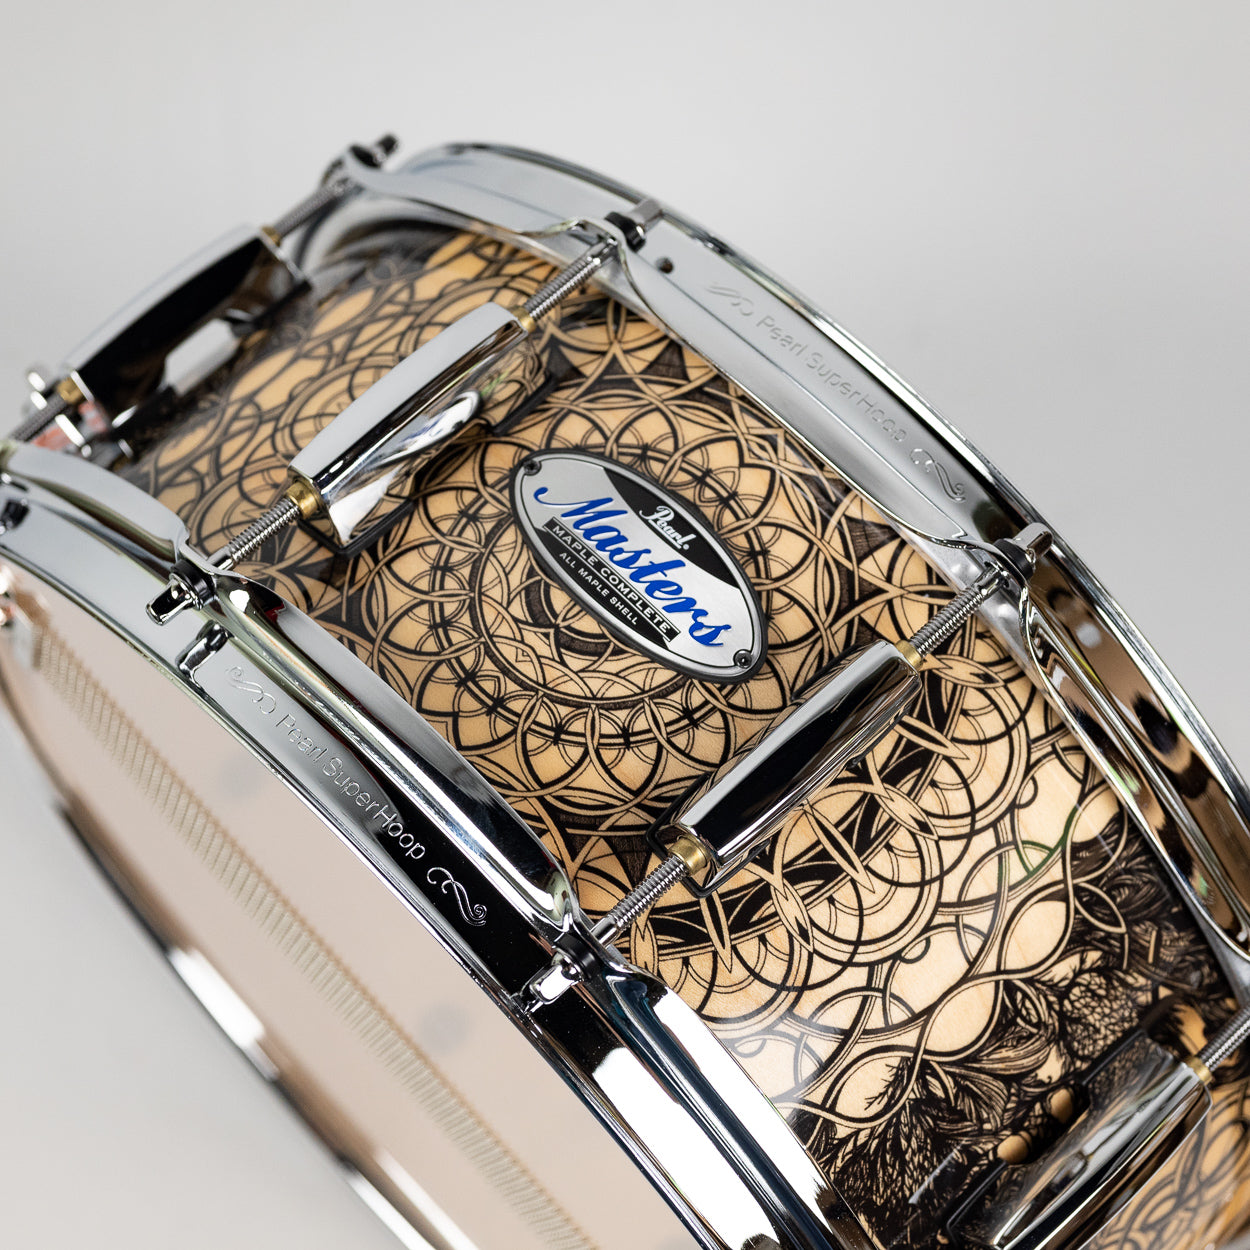 Pearl Masters Maple Complete 14